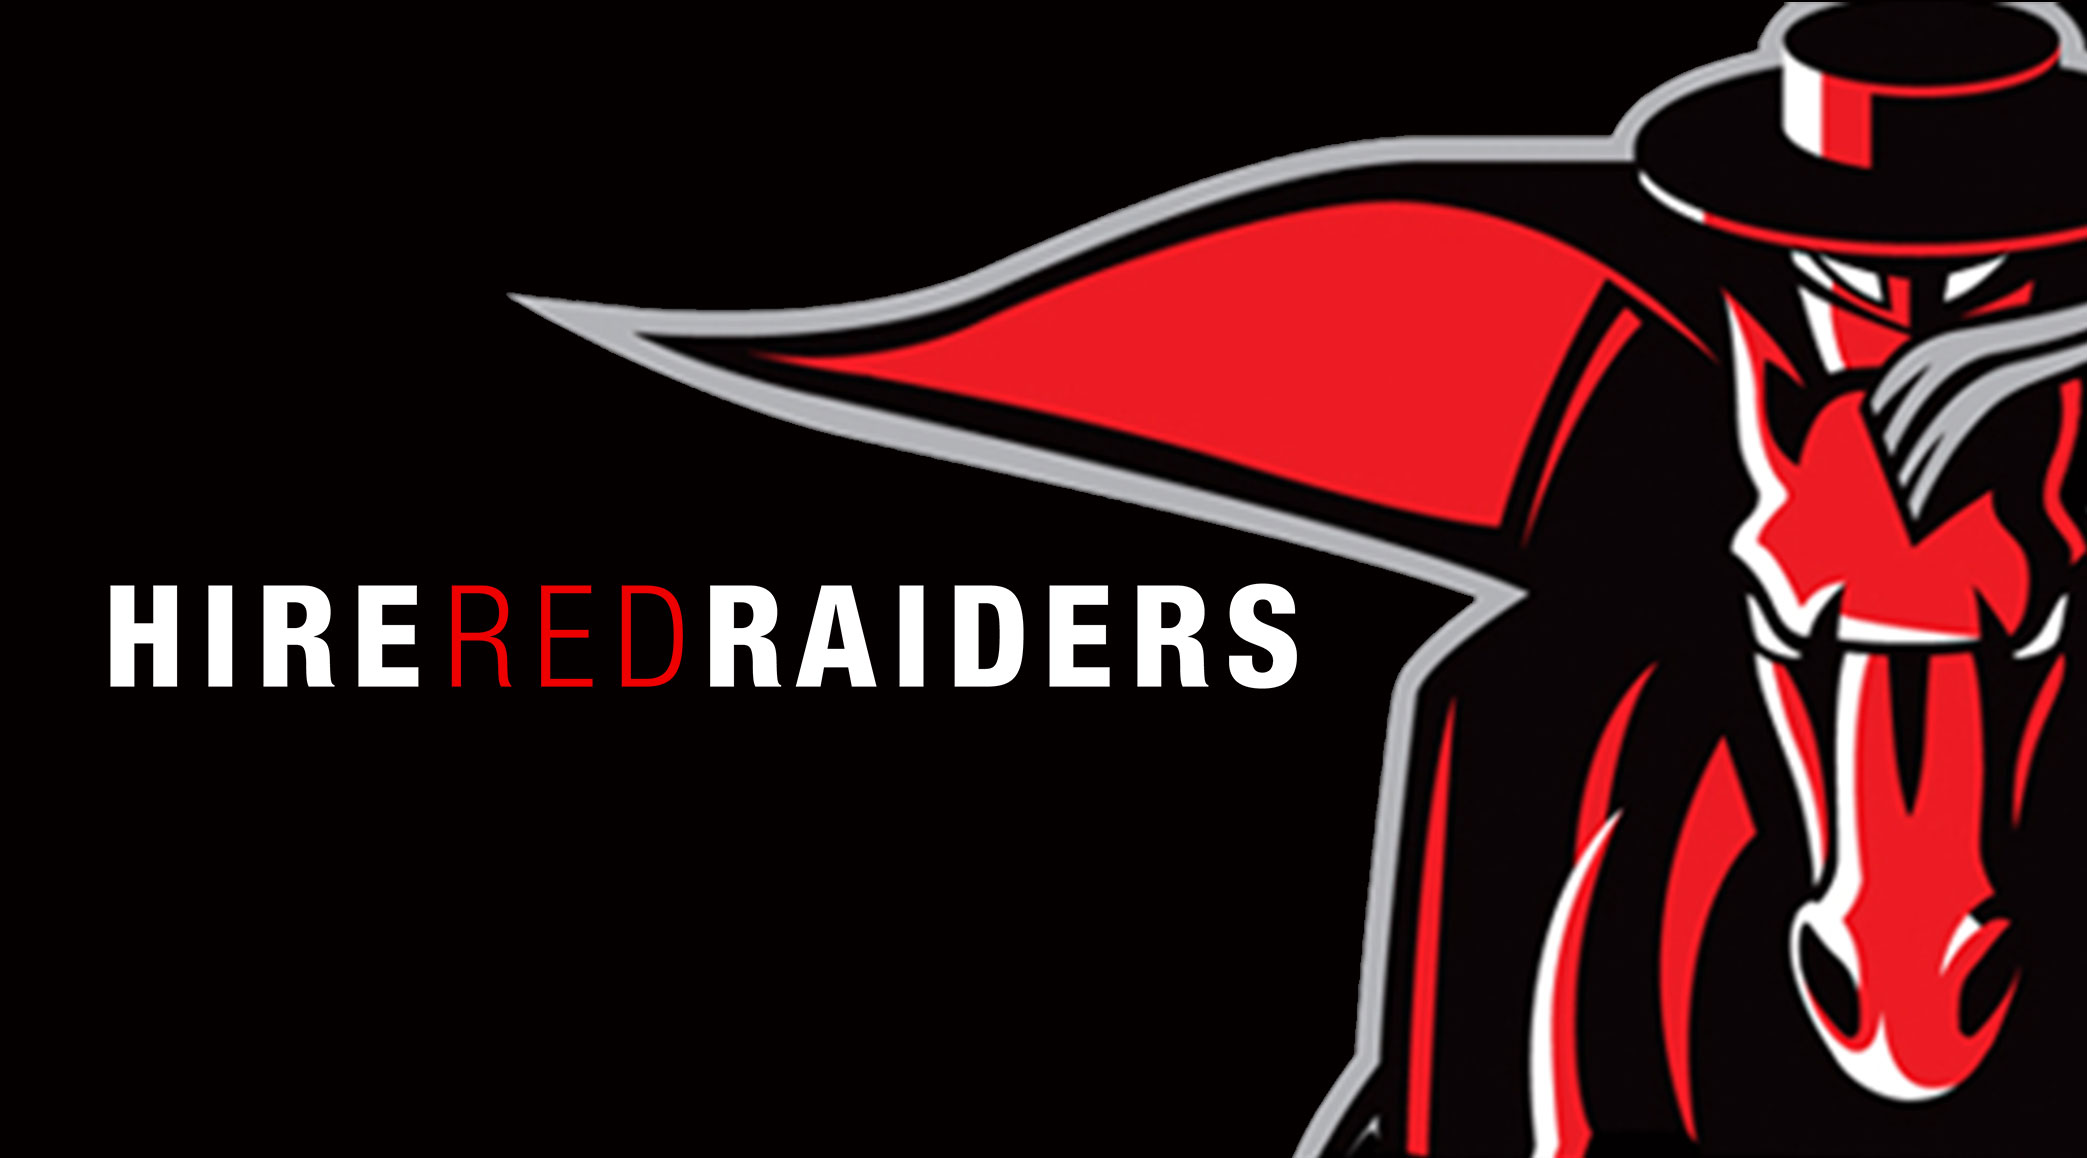 View Employers Specifically Seeking Texas Tech Students and Graduates for Internship and Full-Time Positions at Hire Red Raiders our Job Posting Board